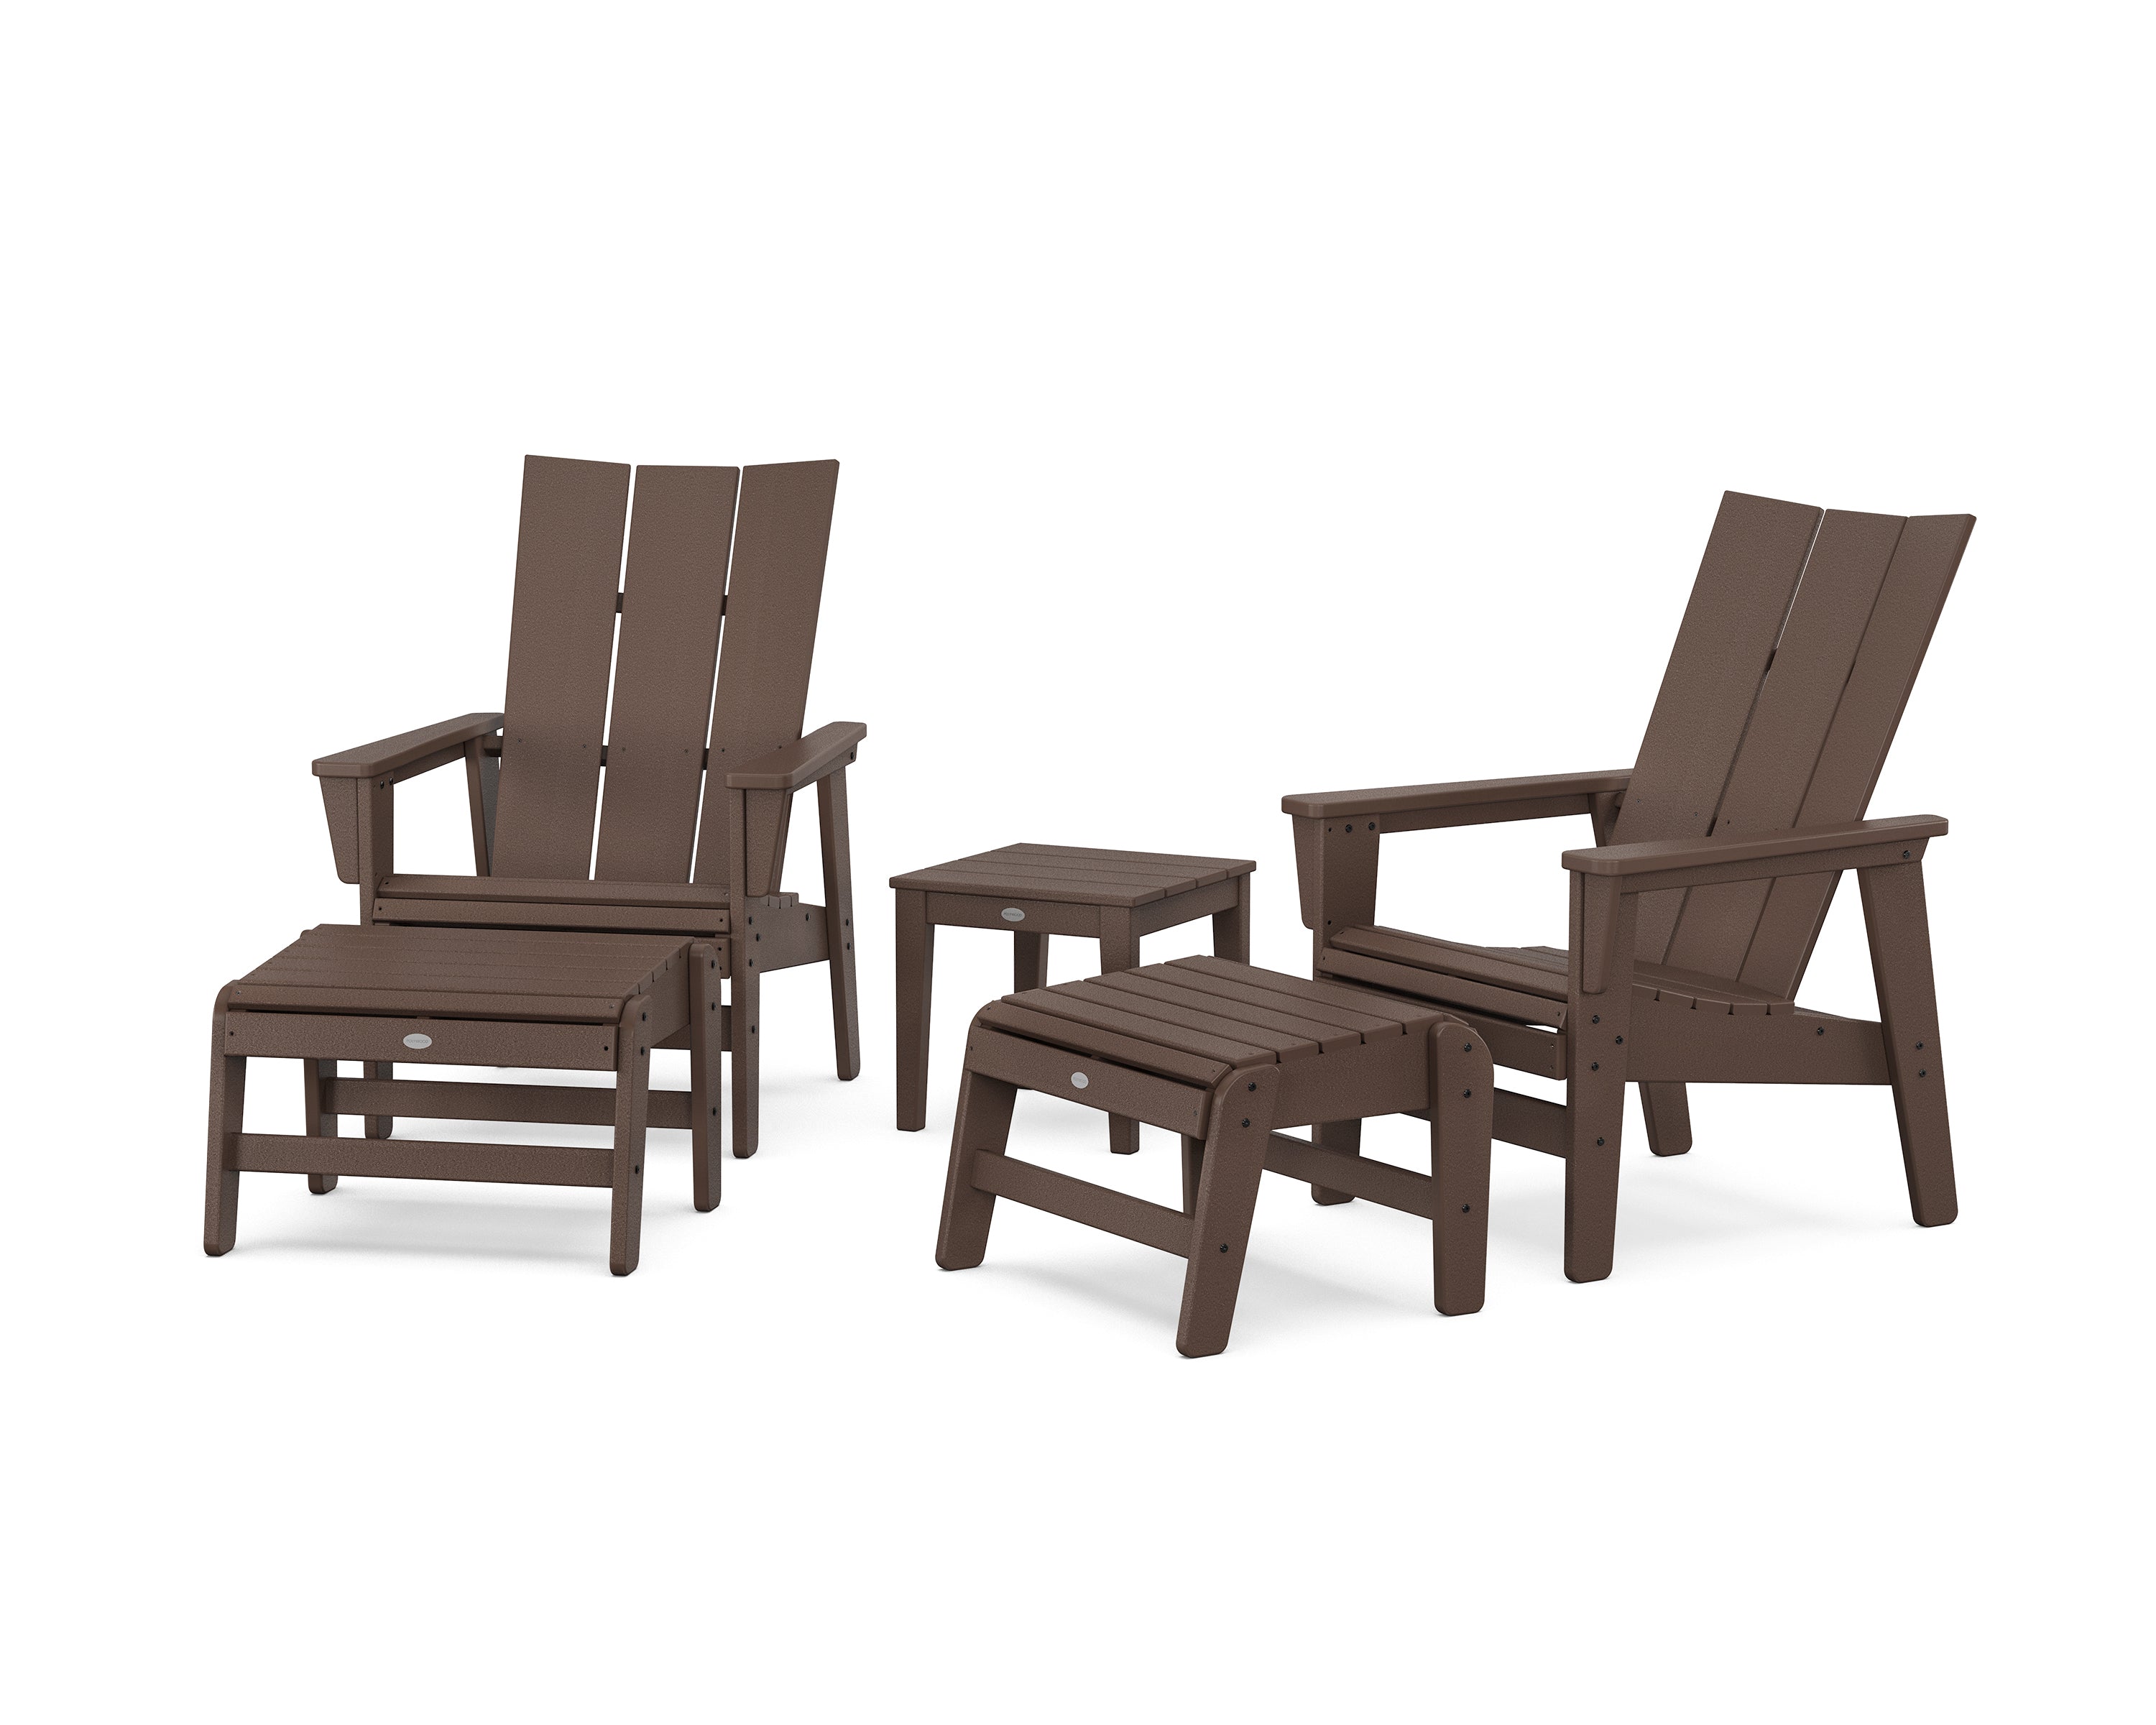 POLYWOOD® 5-Piece Modern Grand Upright Adirondack Set with Ottomans and Side Table in Mahogany